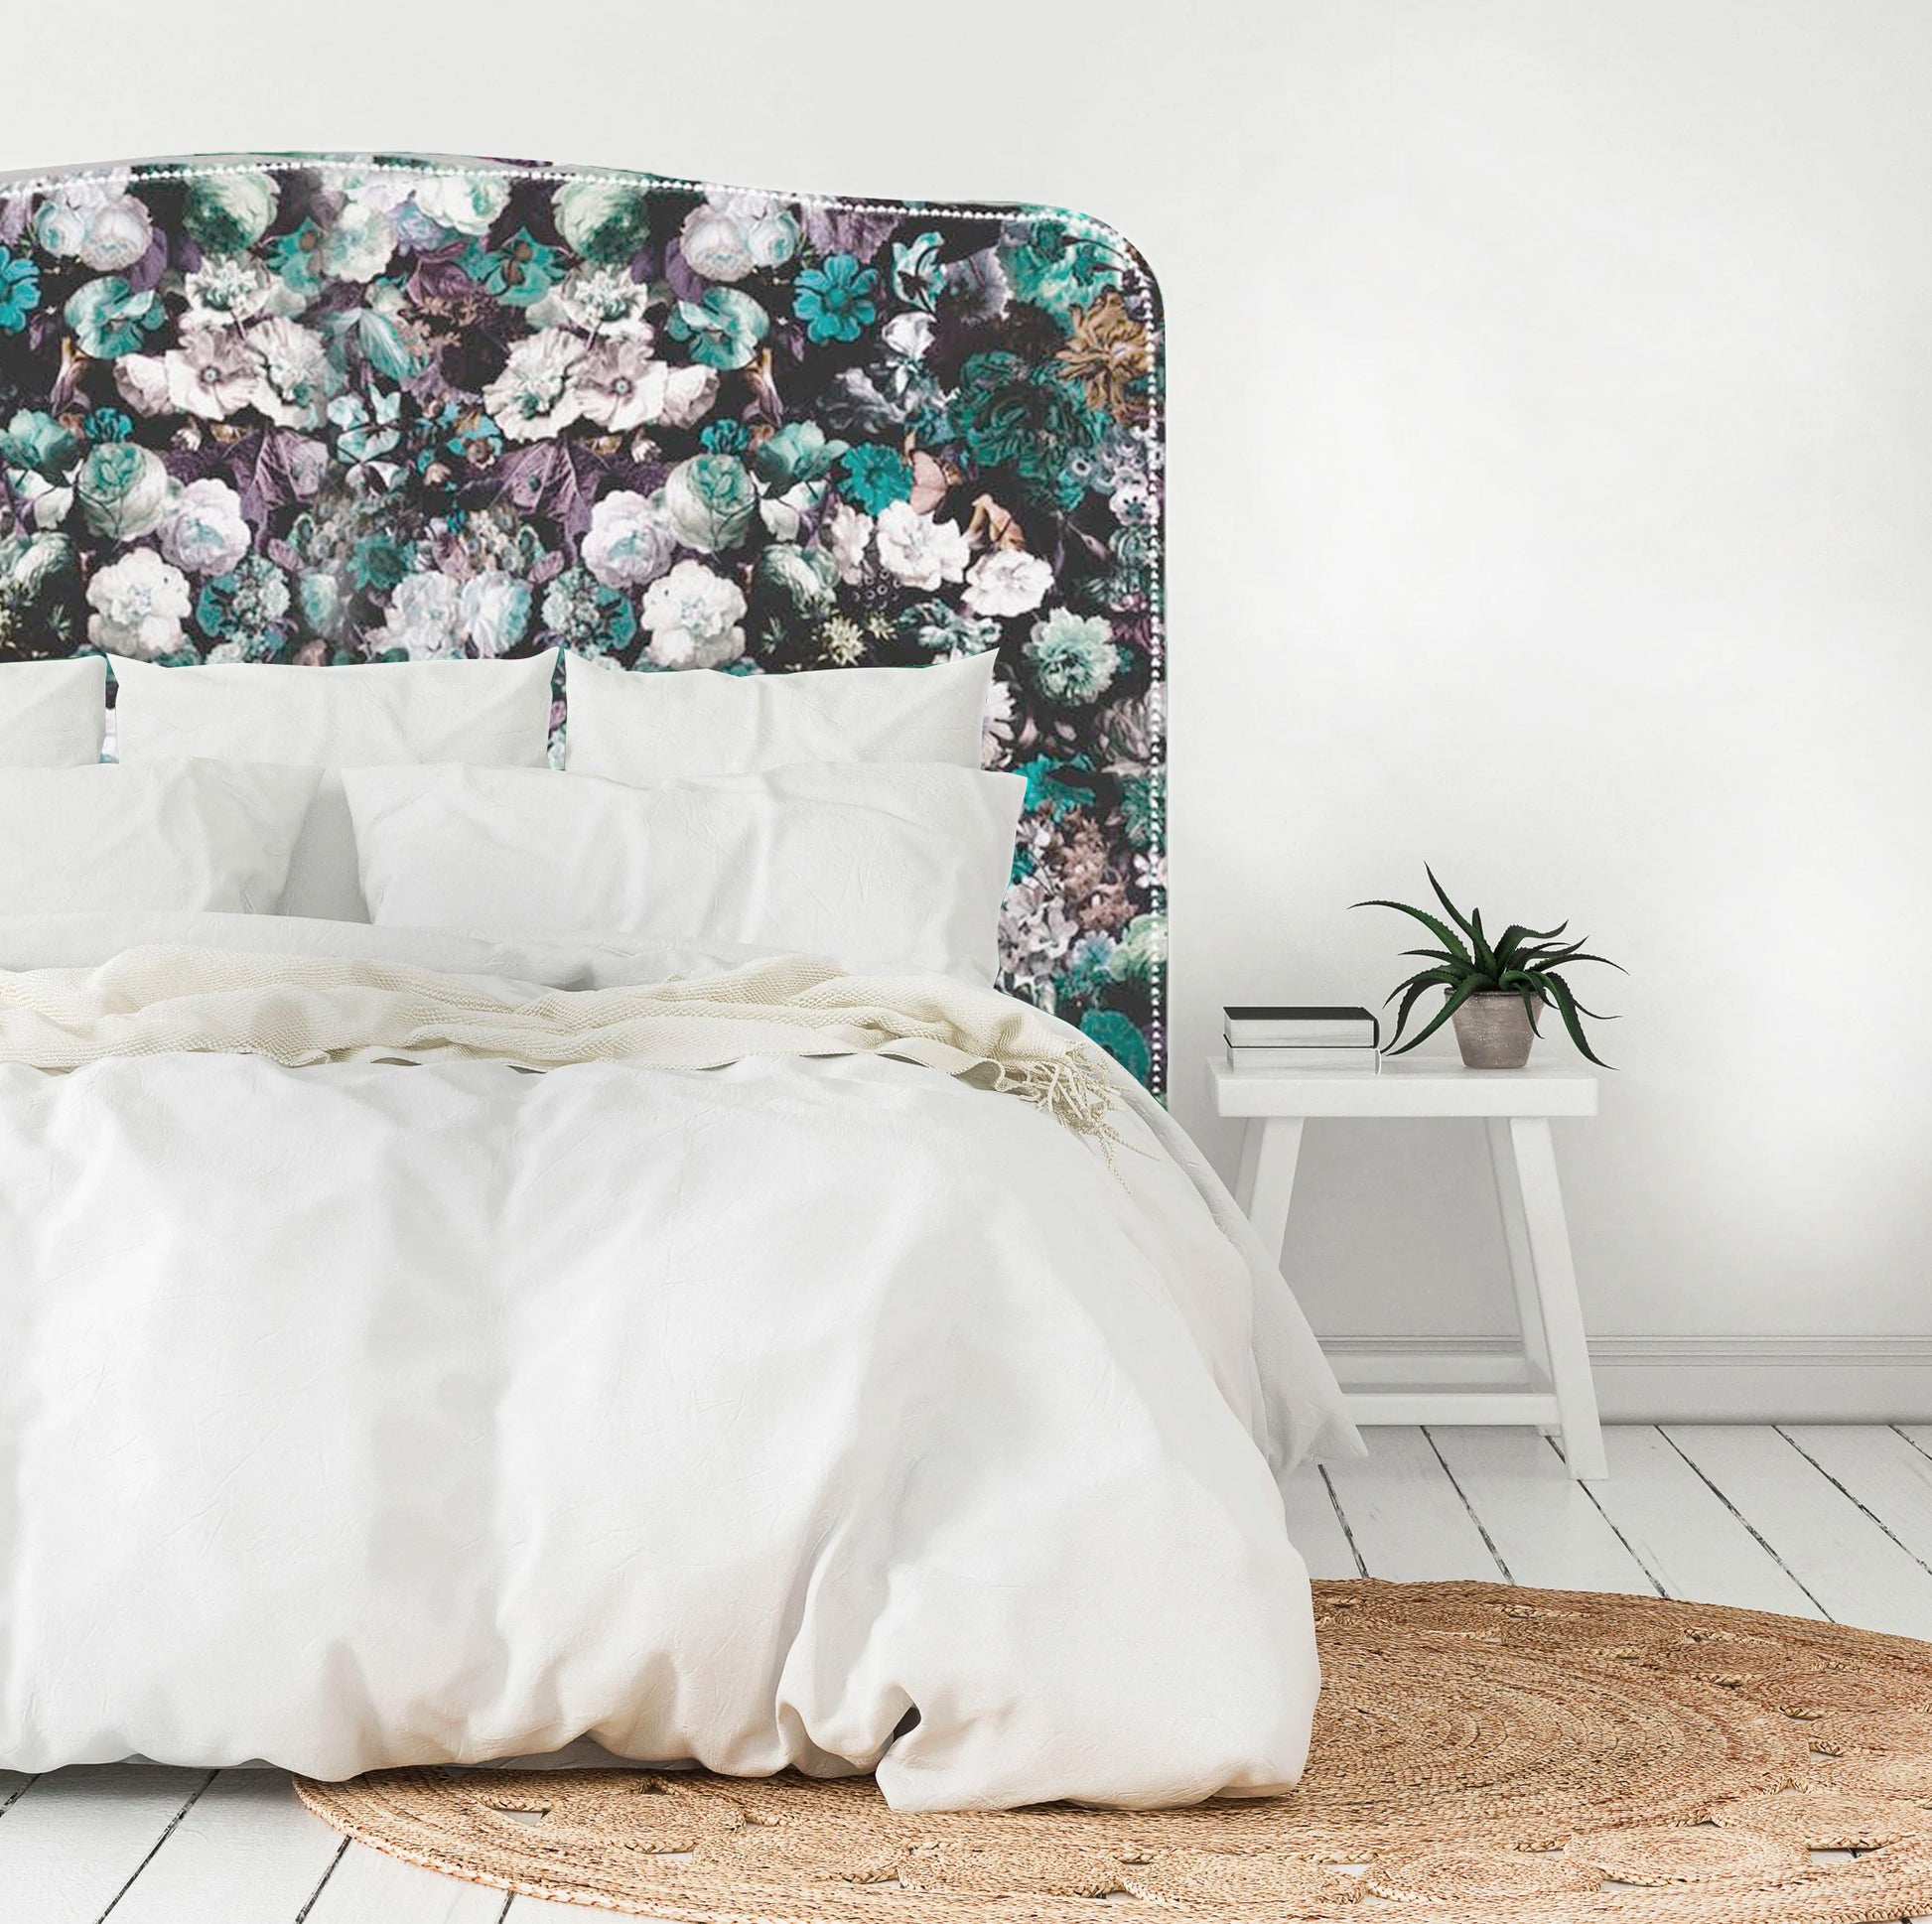 Our classic Cleveland style headboard is given a bold face-lift with the use of colourful, floral velvet. As these are made to order in NZ, please allow 6-8 weeks for production.